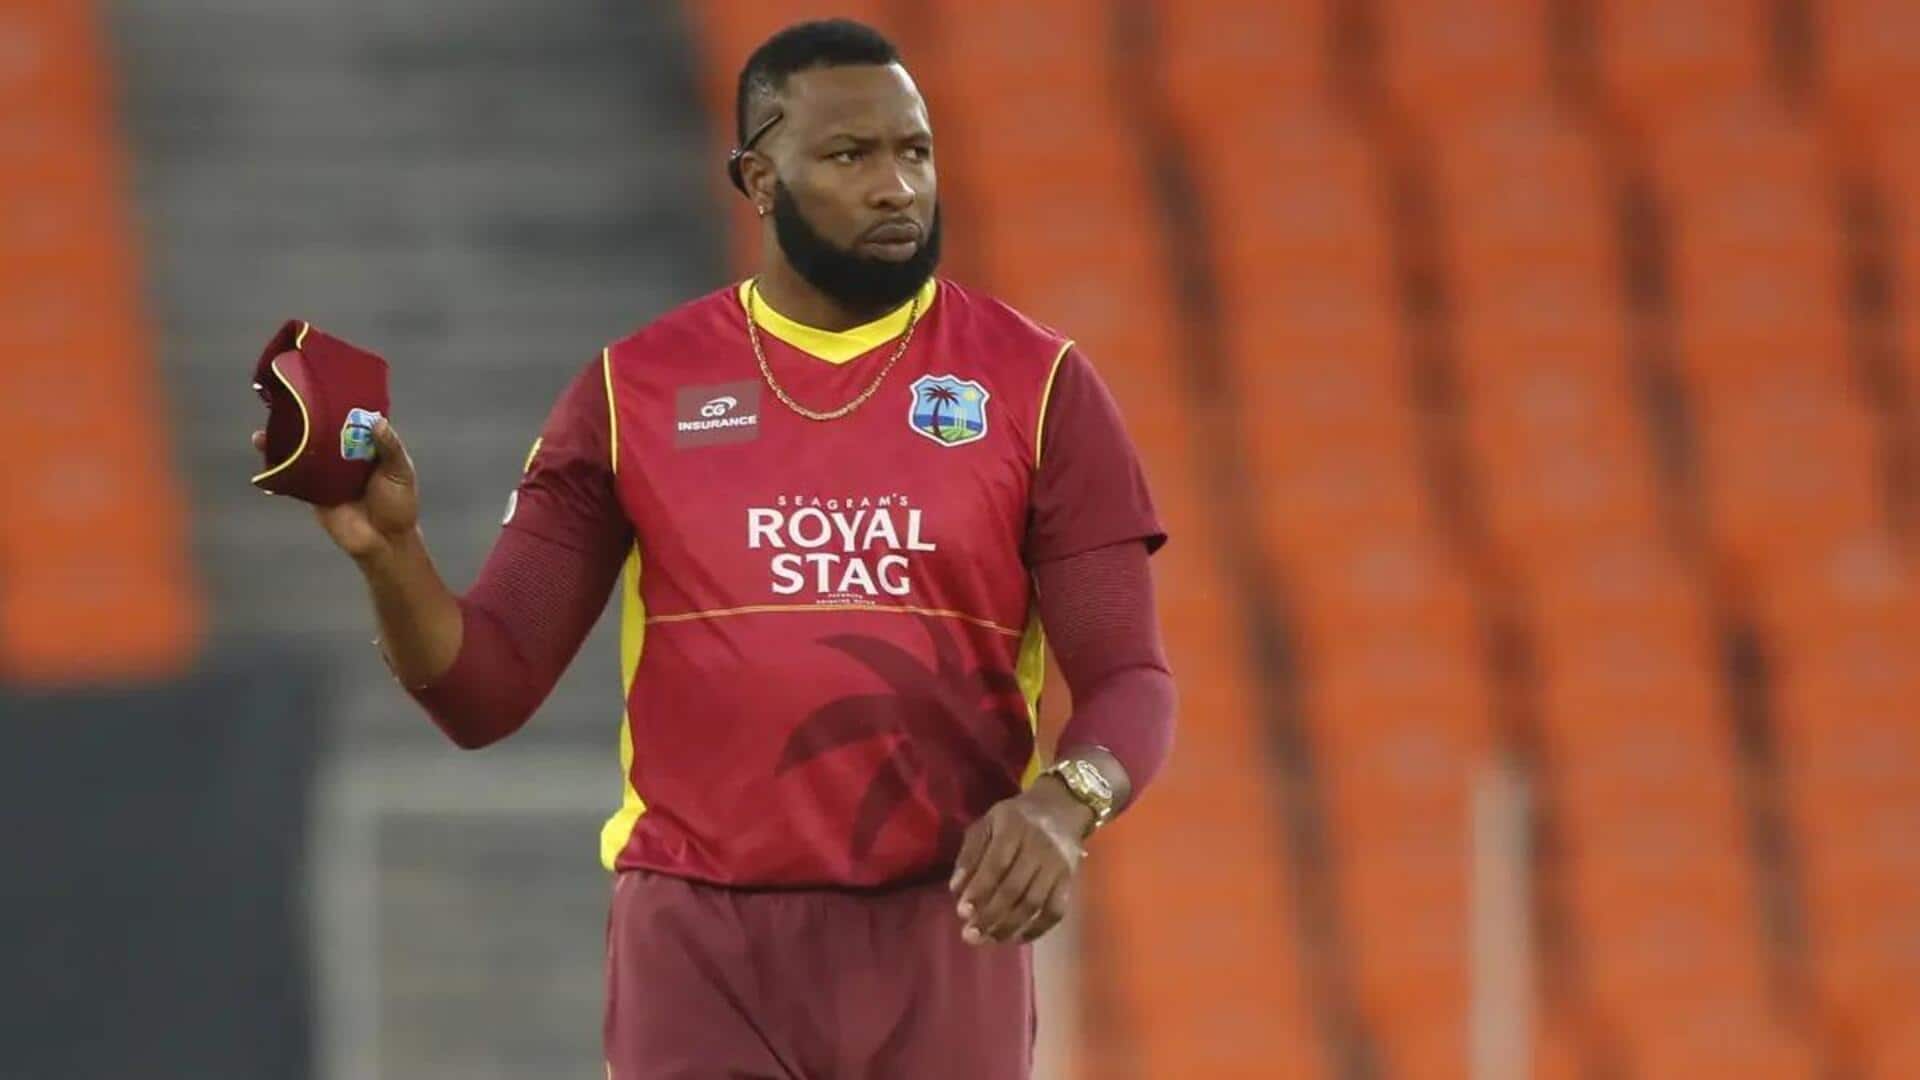 Kieron Pollard named England's assistant coach for T20 World Cup